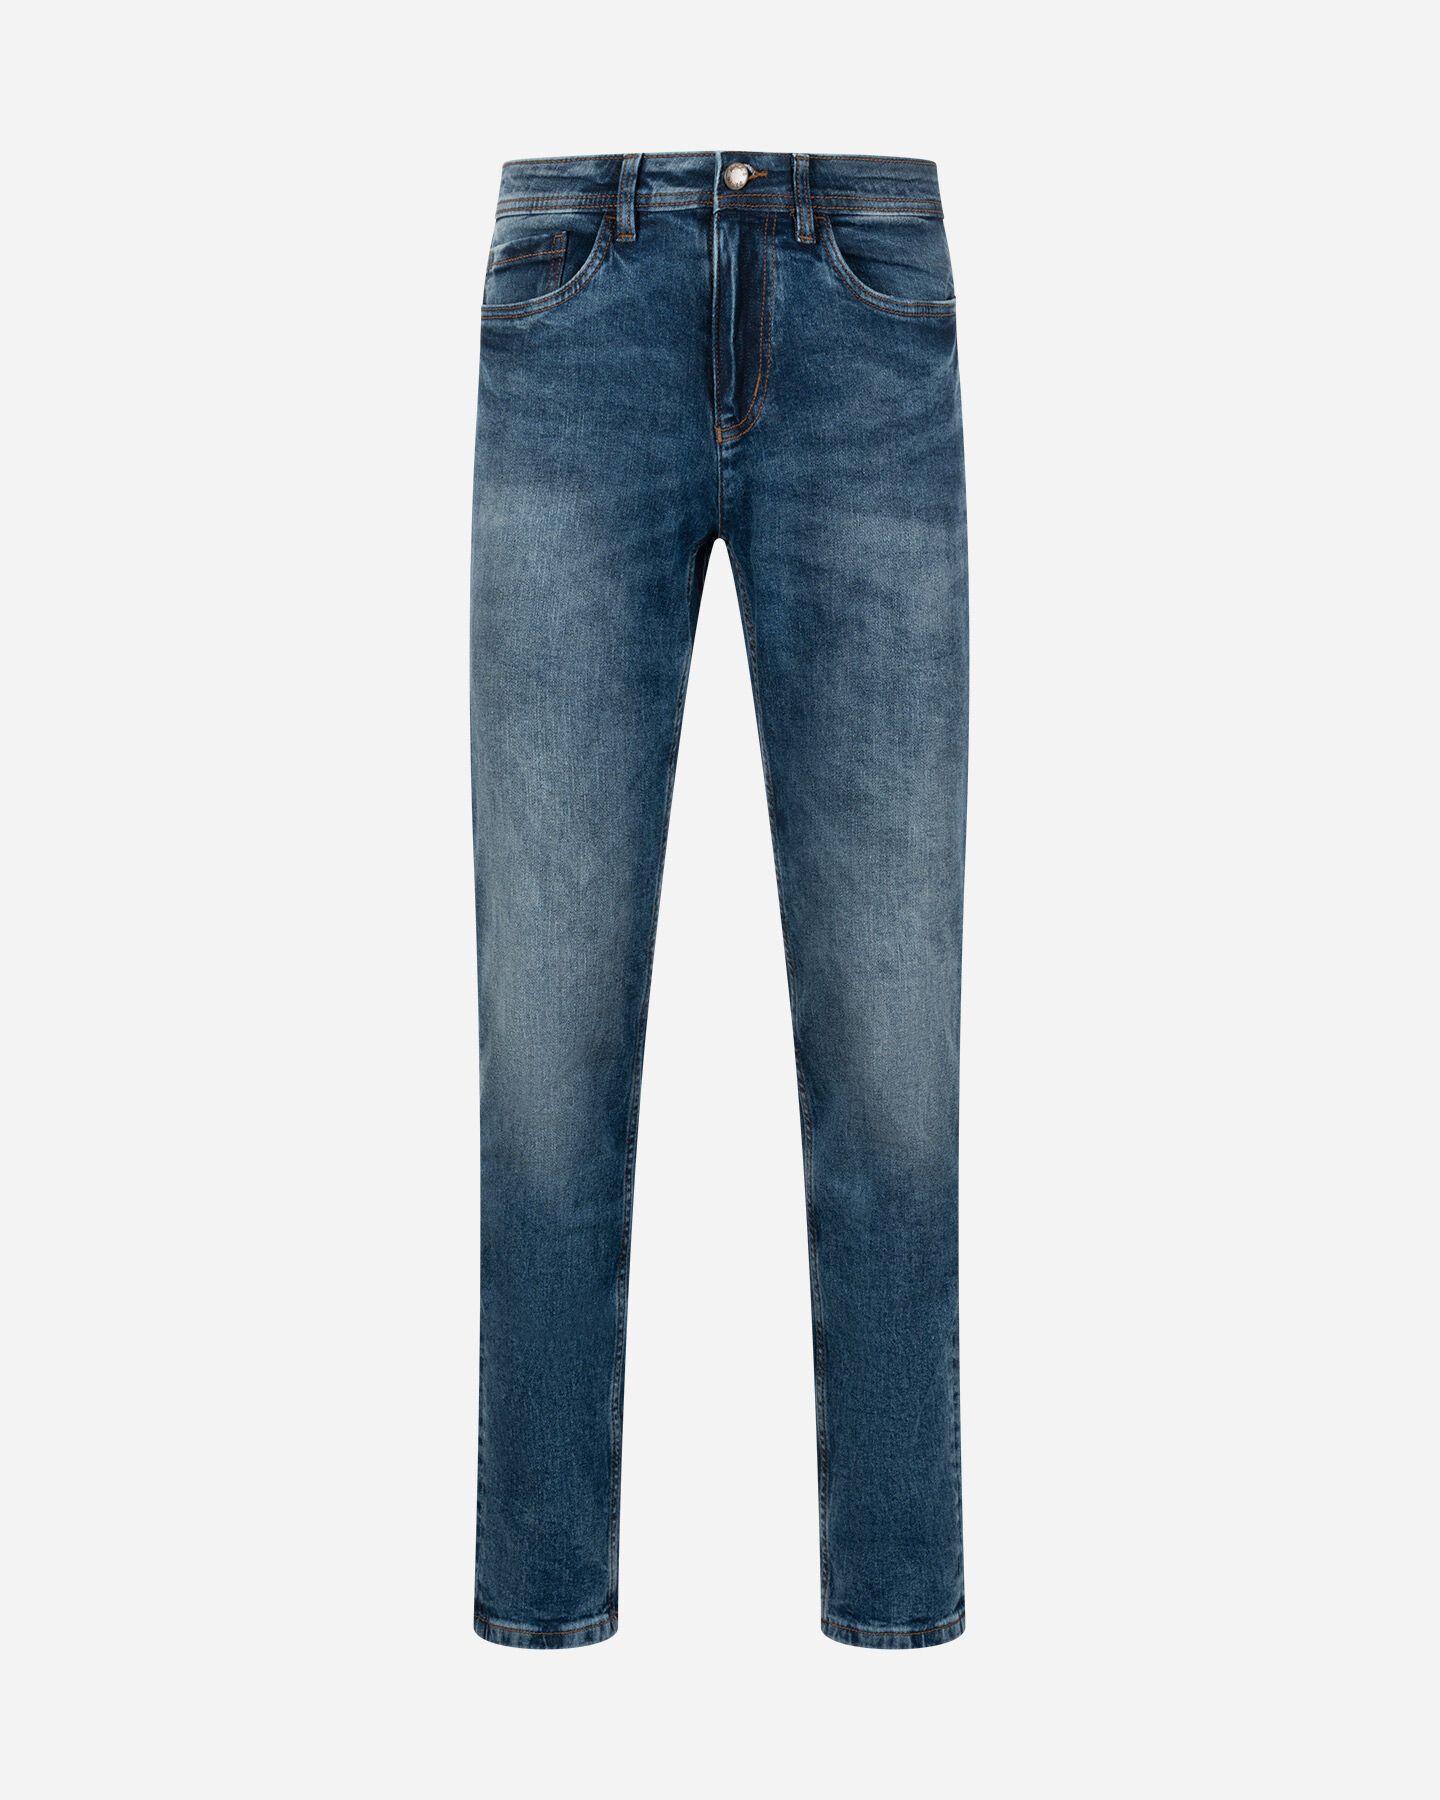  Jeans DACK'S ESSENTIAL M S4129647|MD|44 scatto 4